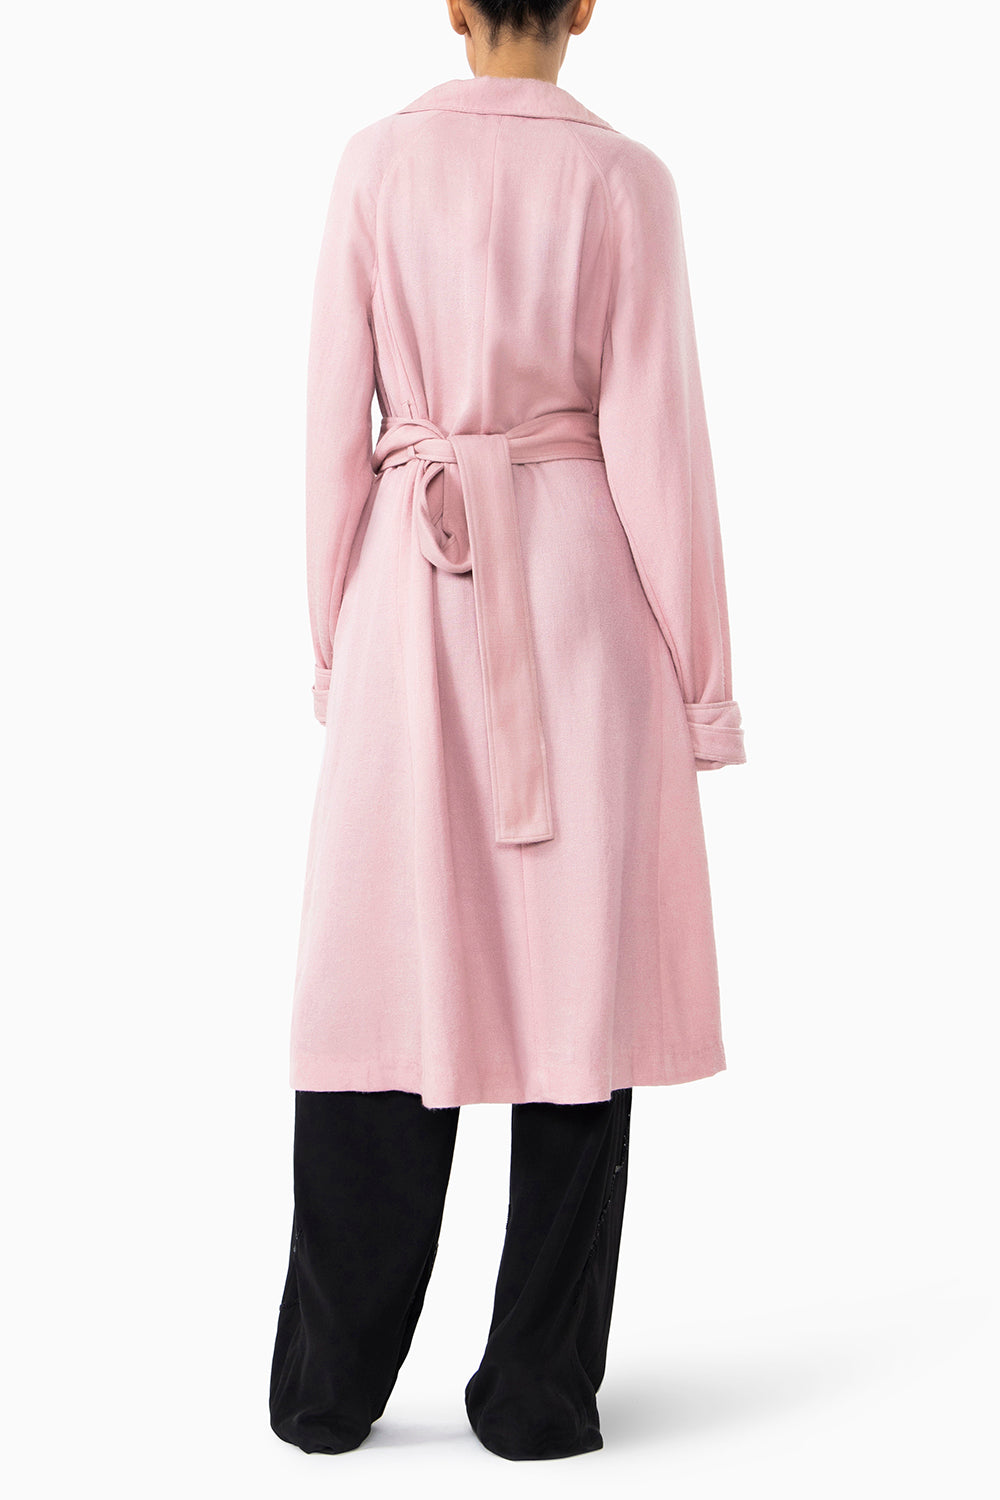 Barely Pink Pashmina Trench Coat